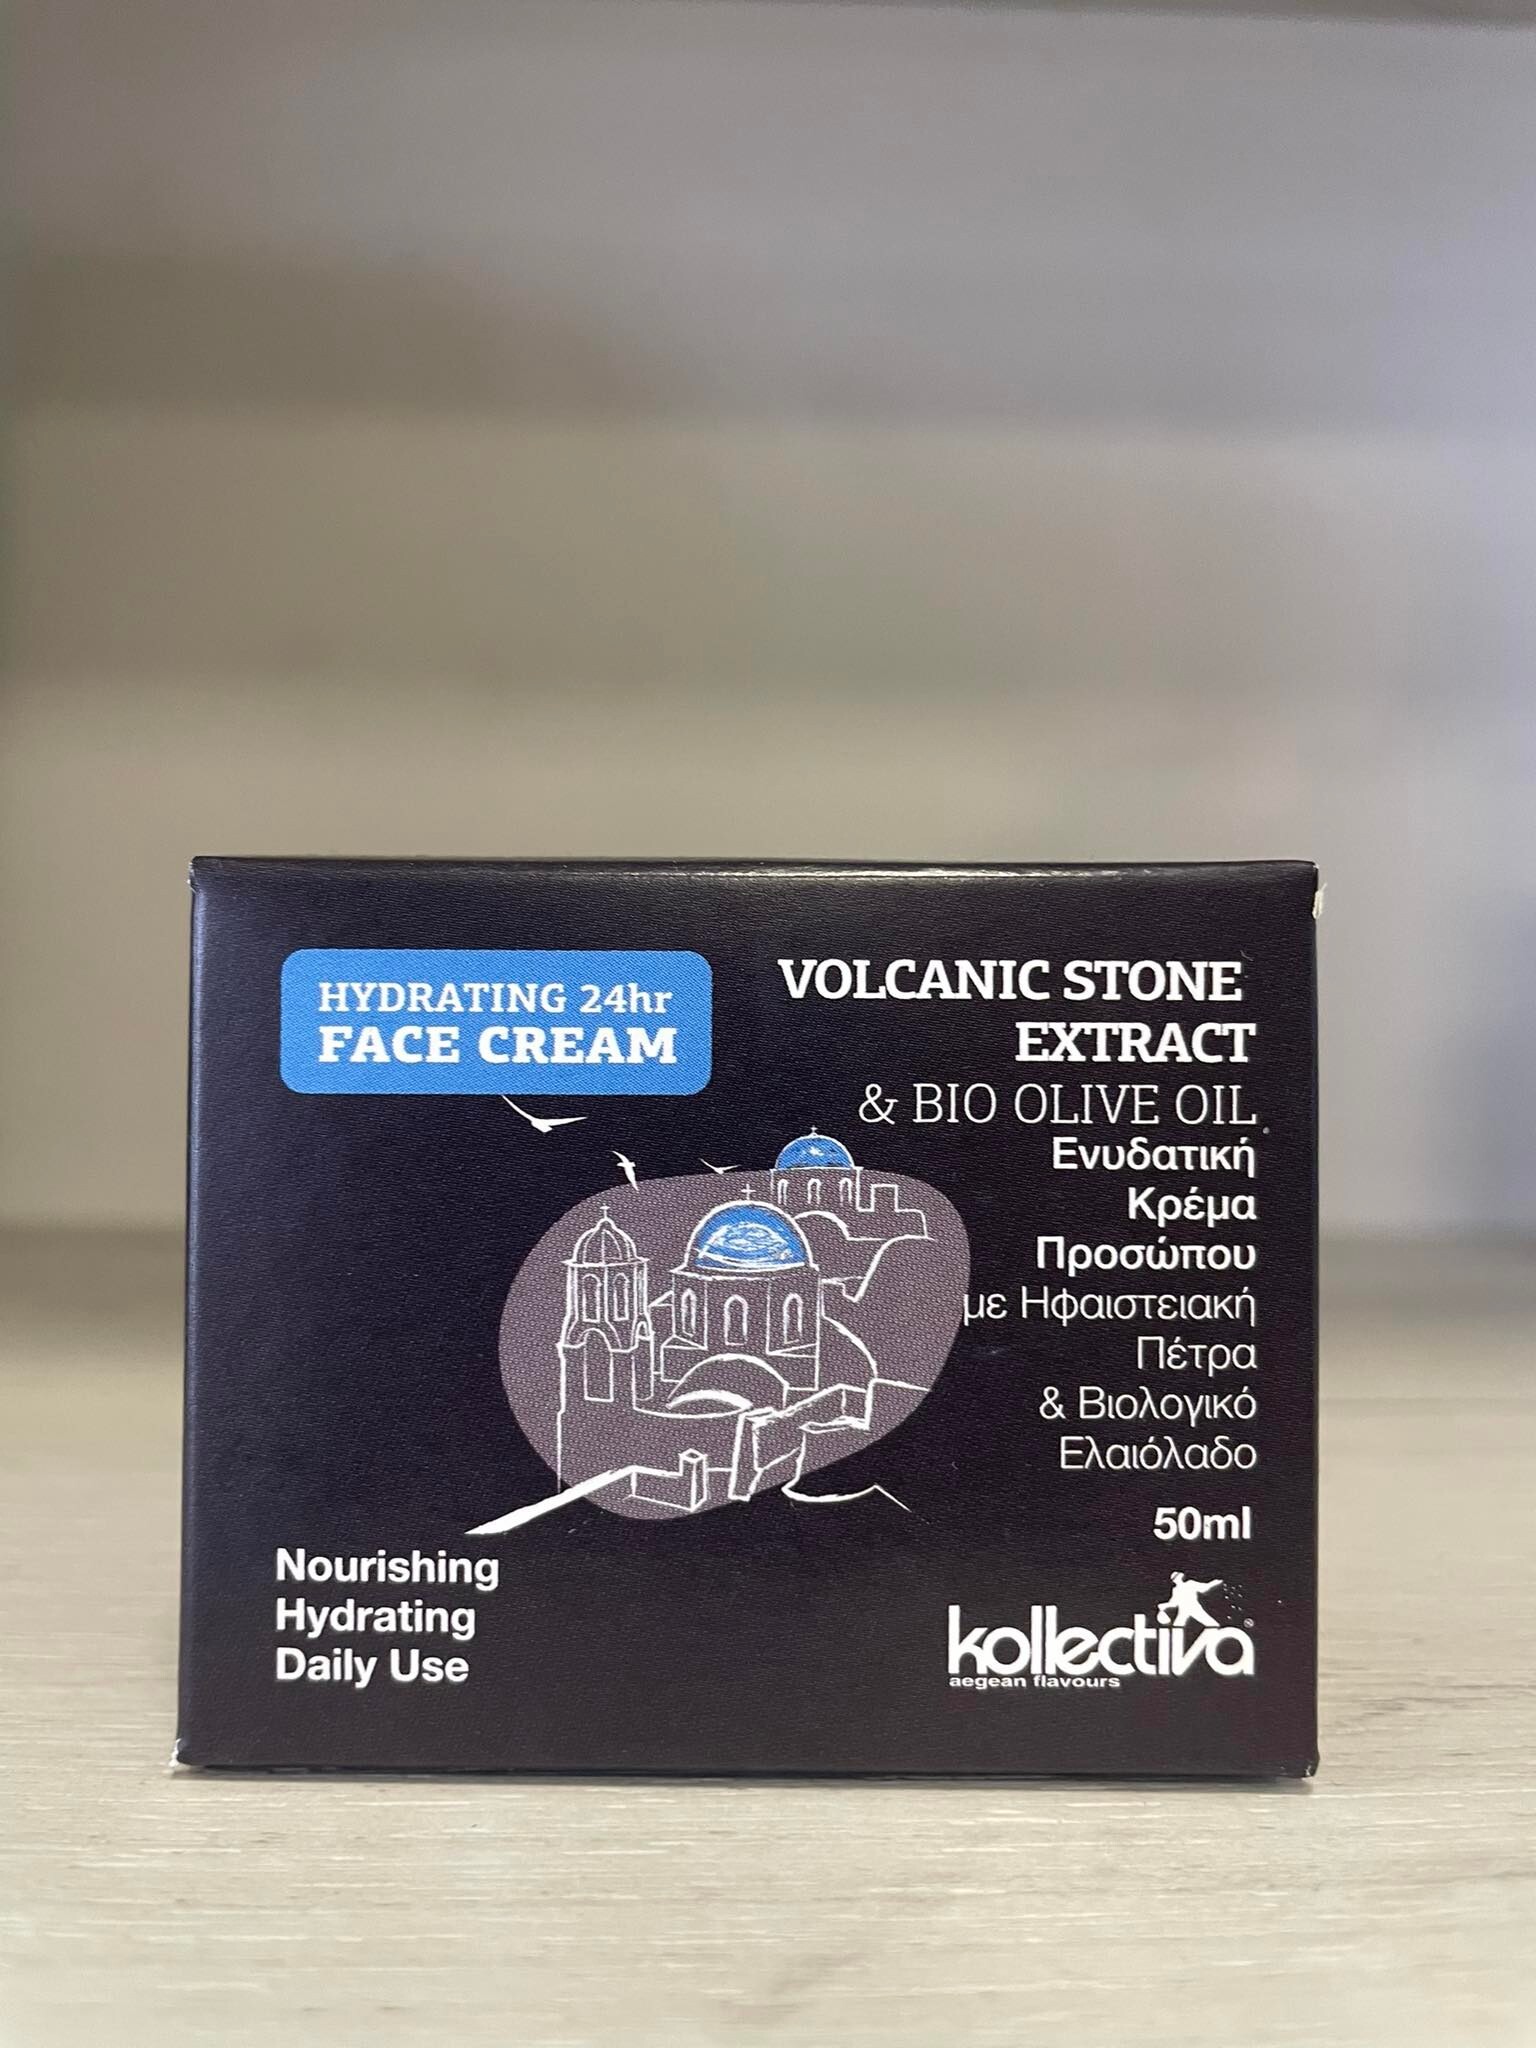 Kollectiva-Hydrating 24hr Face Cream with Volcanic Stone extract and Bio Olive Oil